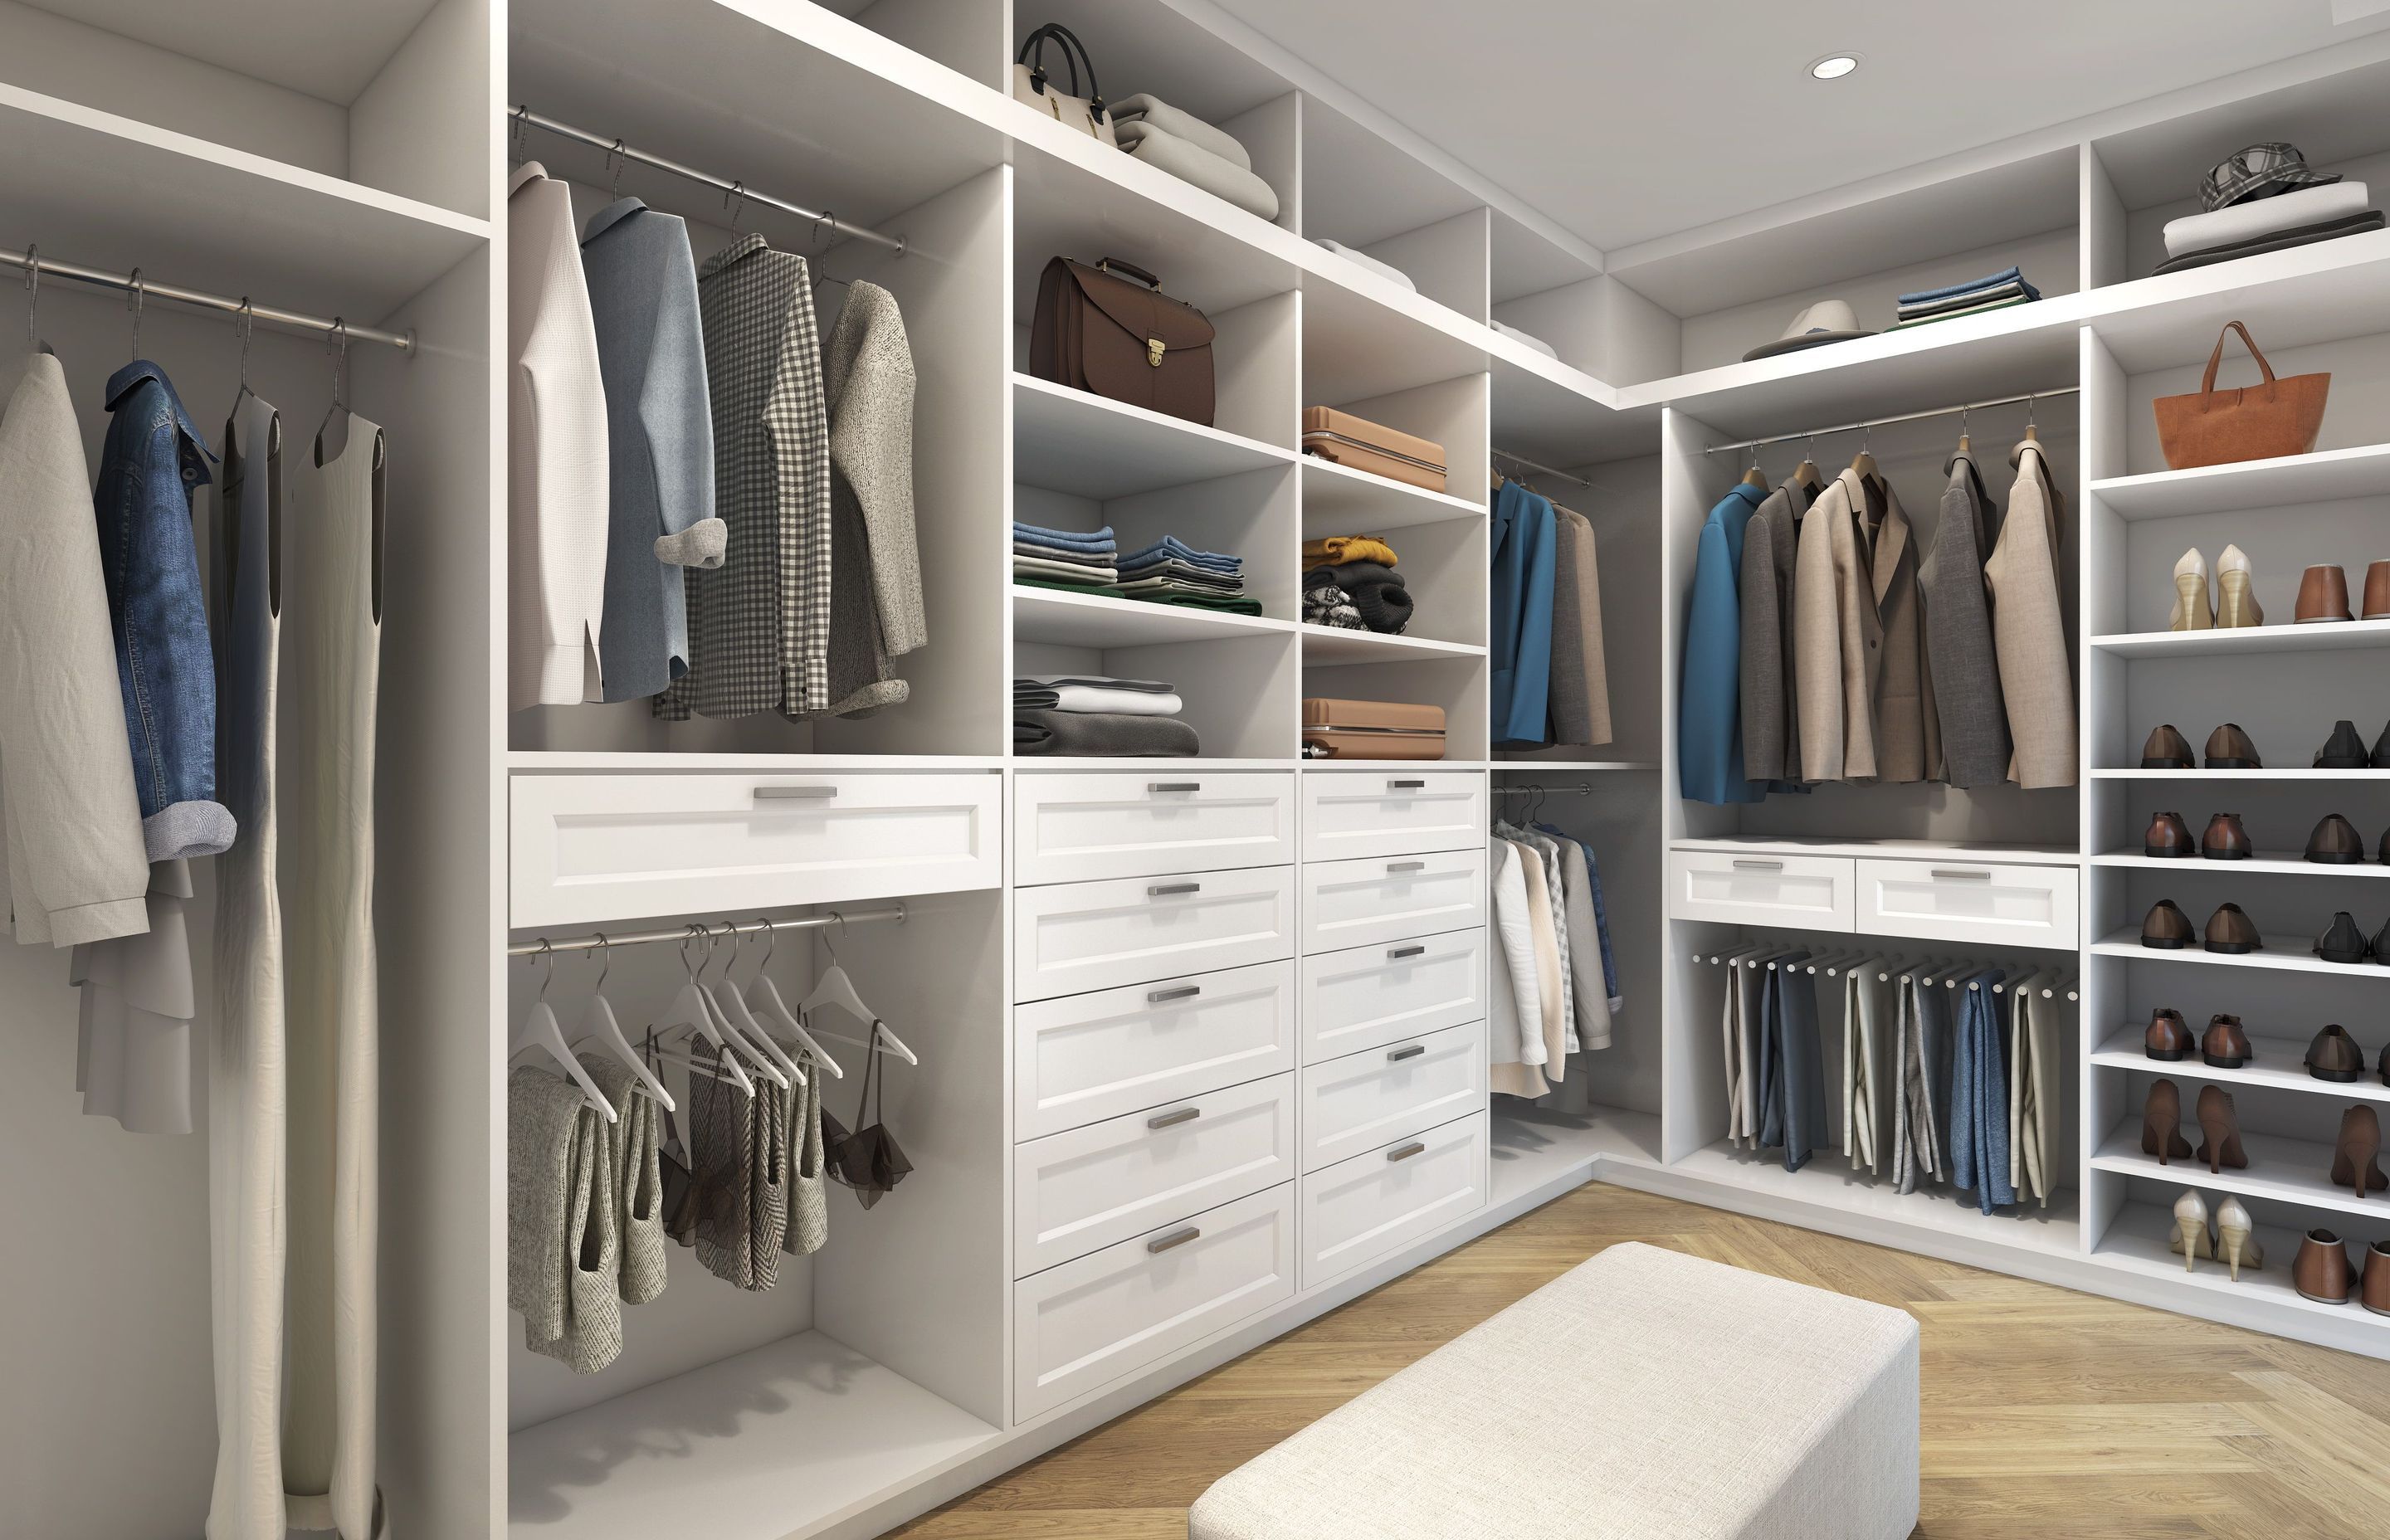 The secret to a Hollywood-style wardrobe is "a place for everything and everything in its place" says Innovative Interiors wardrobe specialist Neil Robinson.